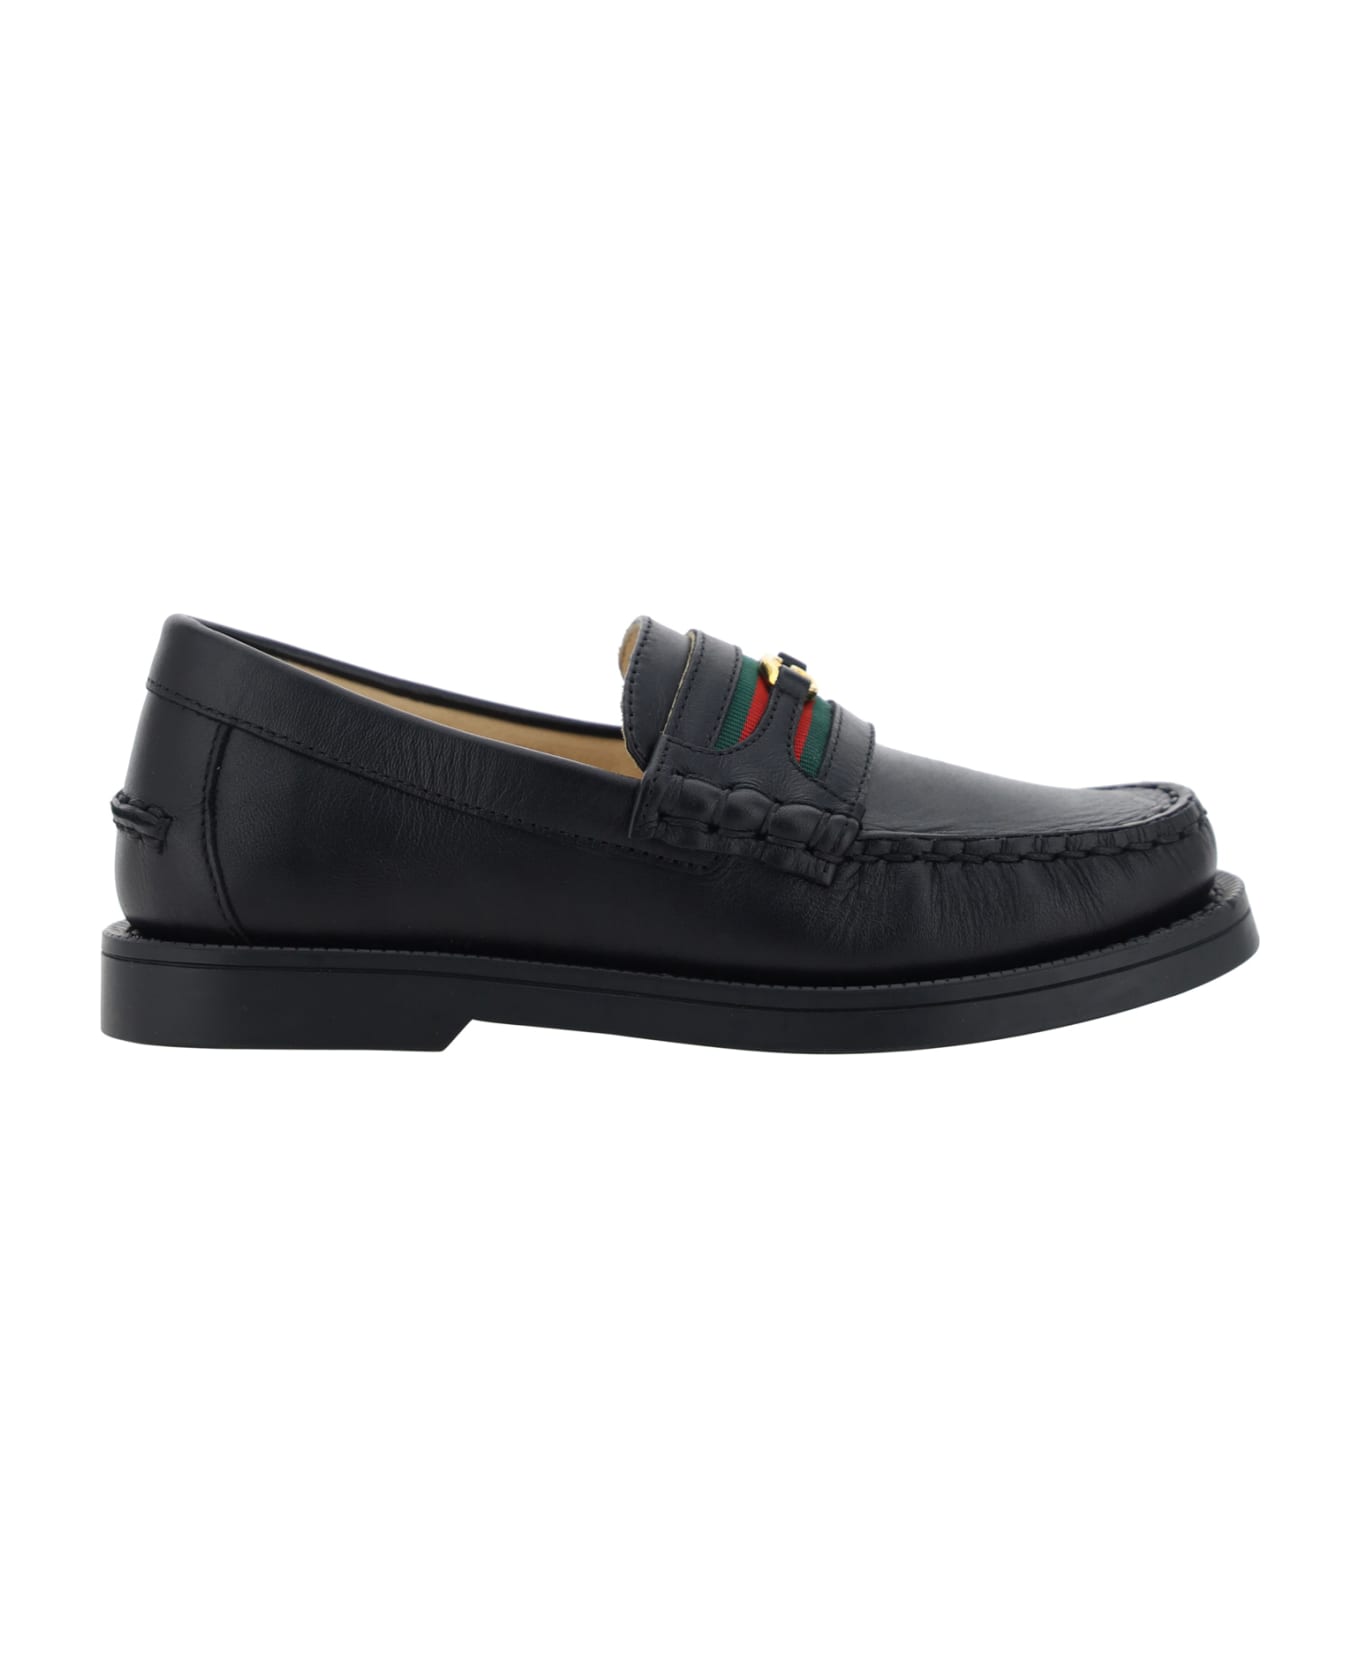 Gucci Loafers For Girl - Black